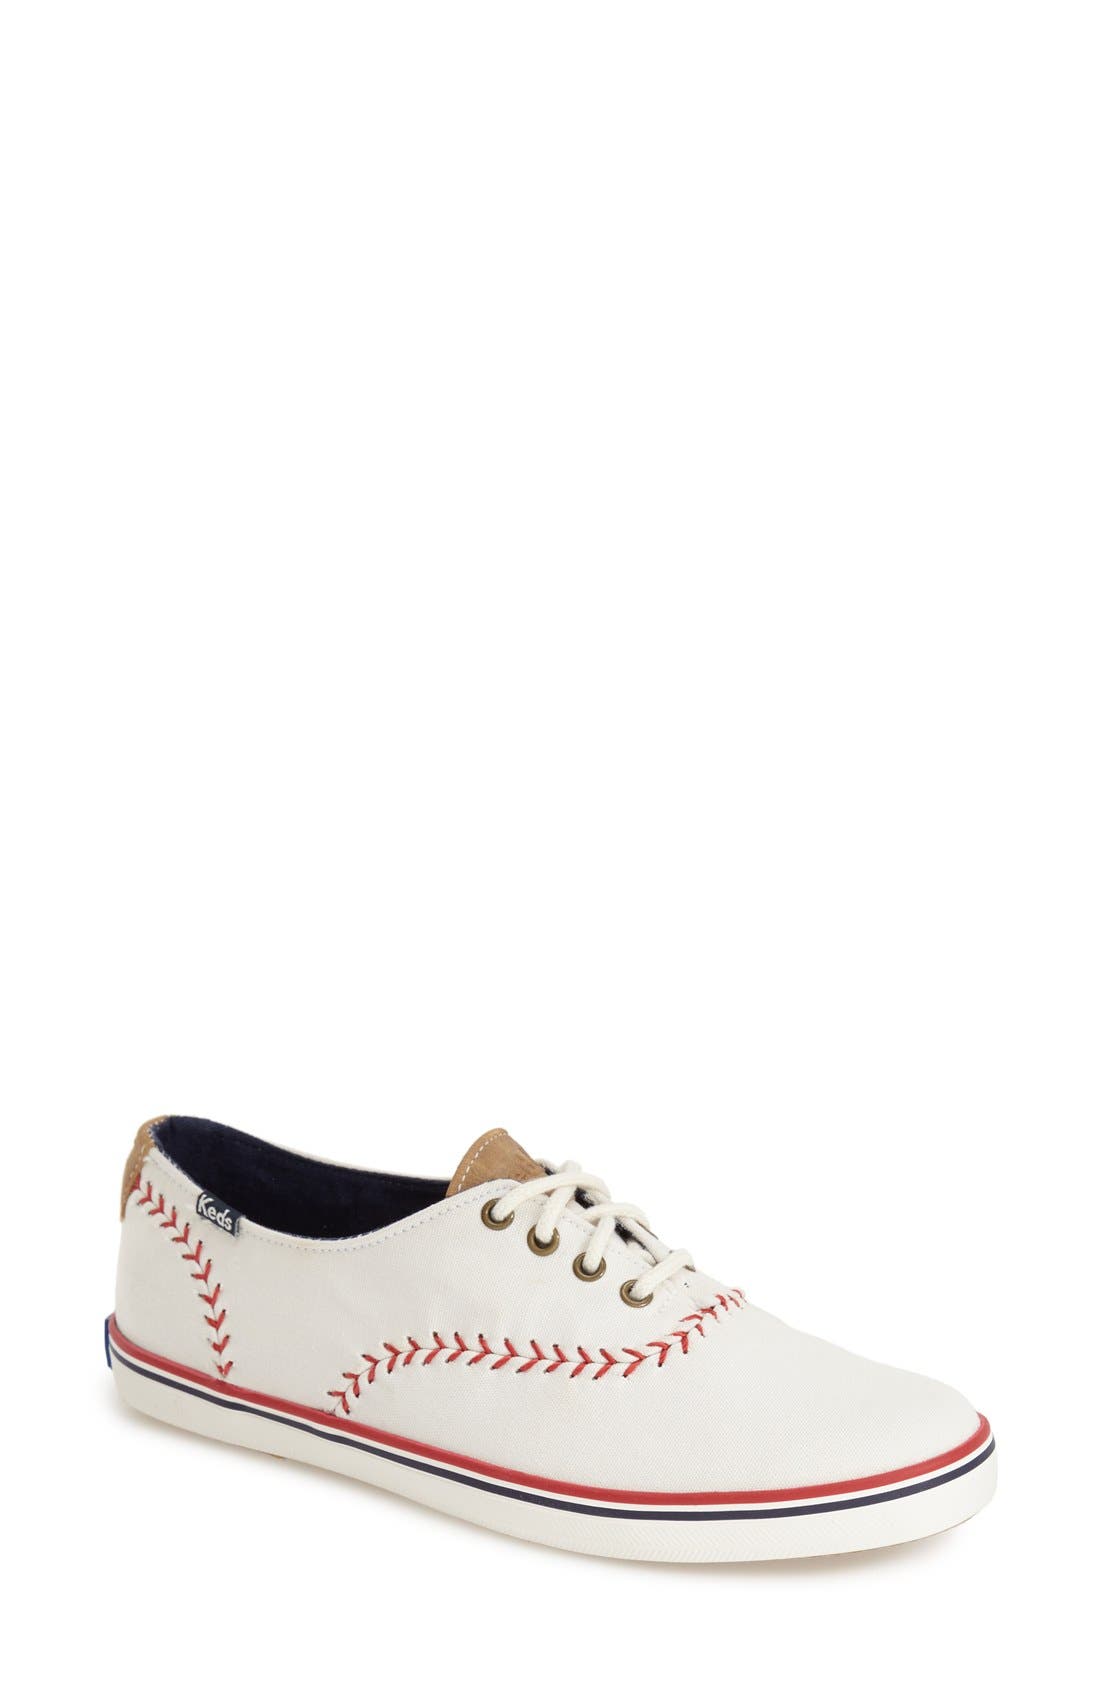 UPC 044209929618 product image for Women's Keds 'Champion - Pennant' Sneaker, Size 9.5 M - Ivory | upcitemdb.com